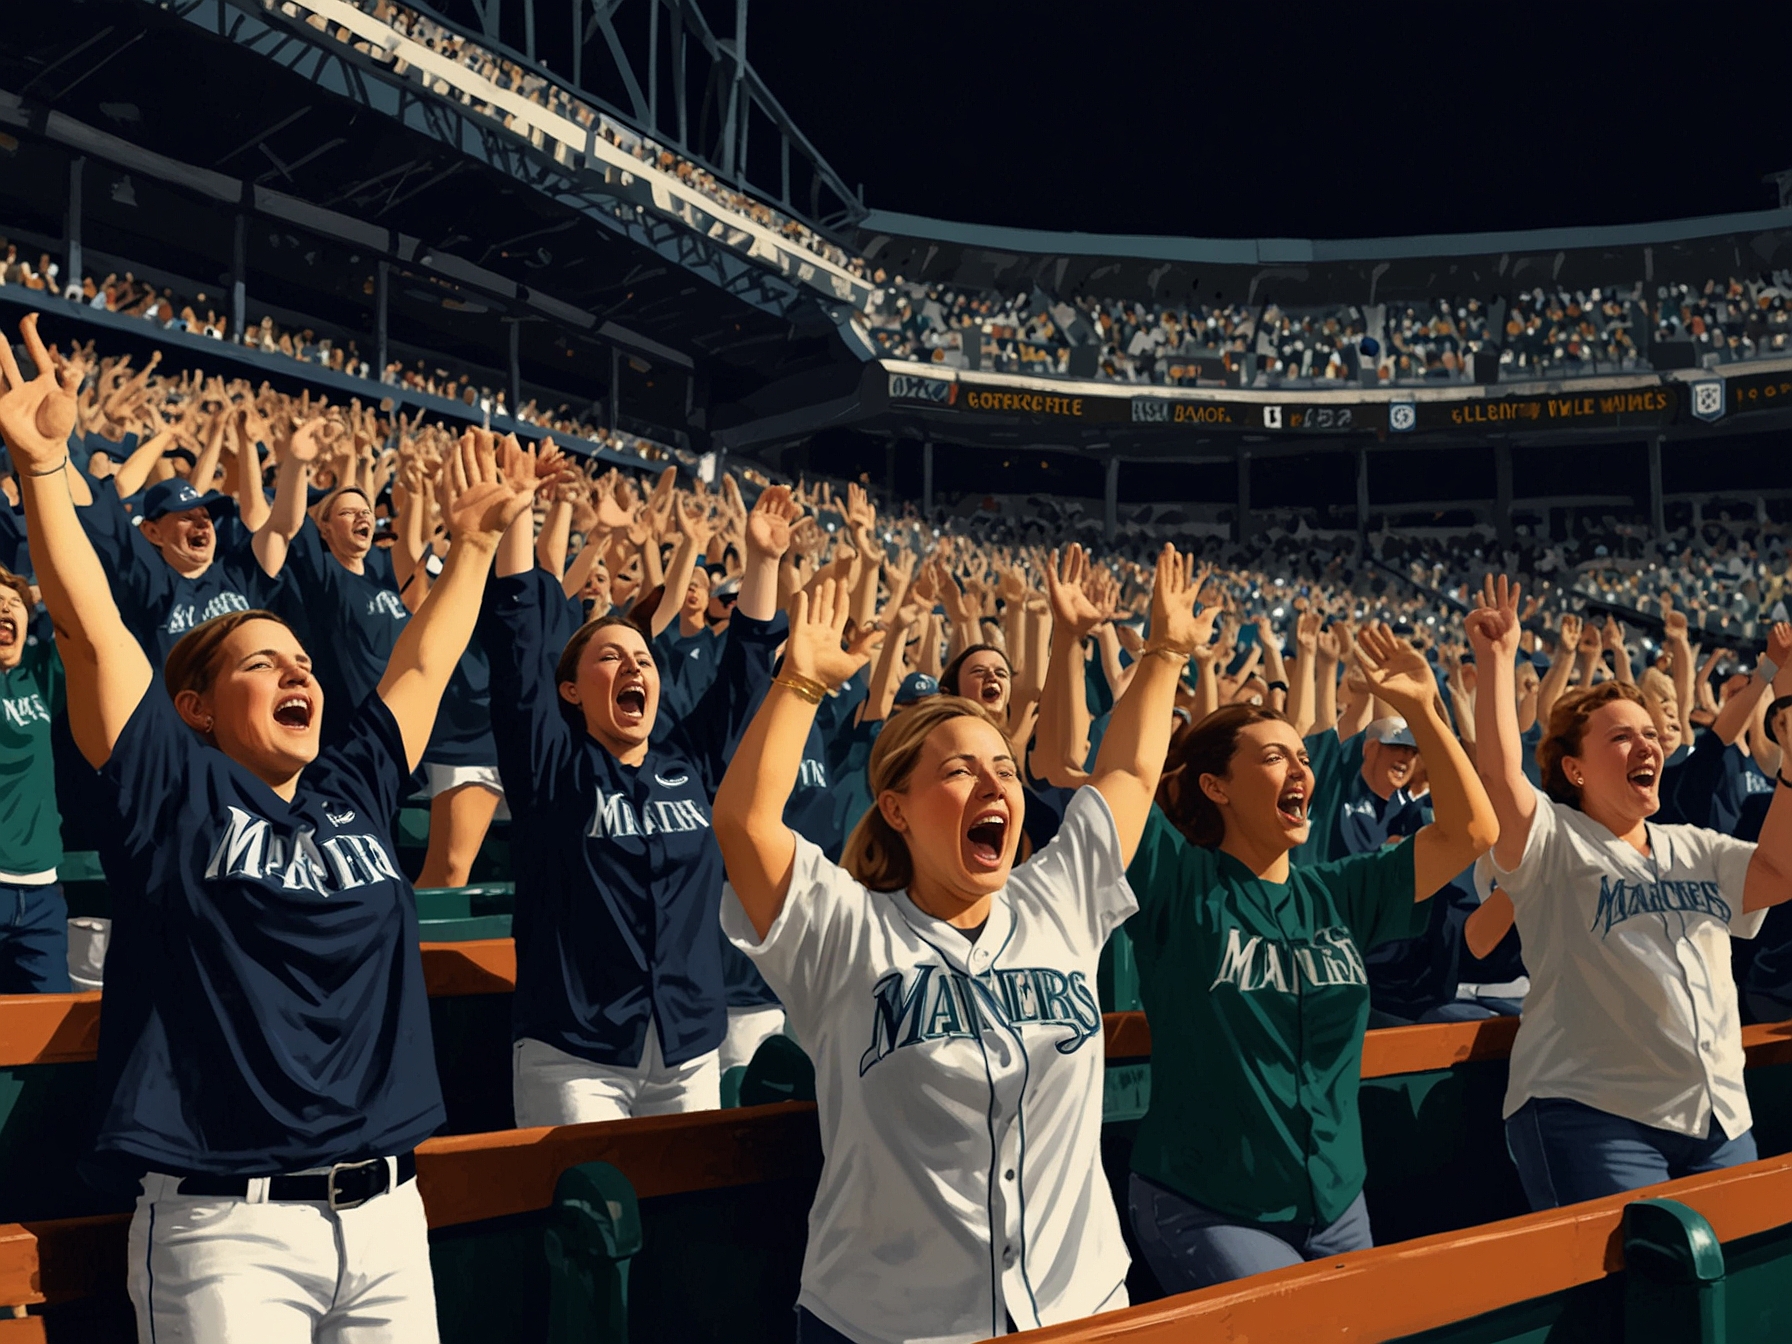 A jubilant crowd of Seattle Mariners fans in the stands, waving team banners and wearing team colors, celebrating a victory that brings them closer to clinching the AL West title.